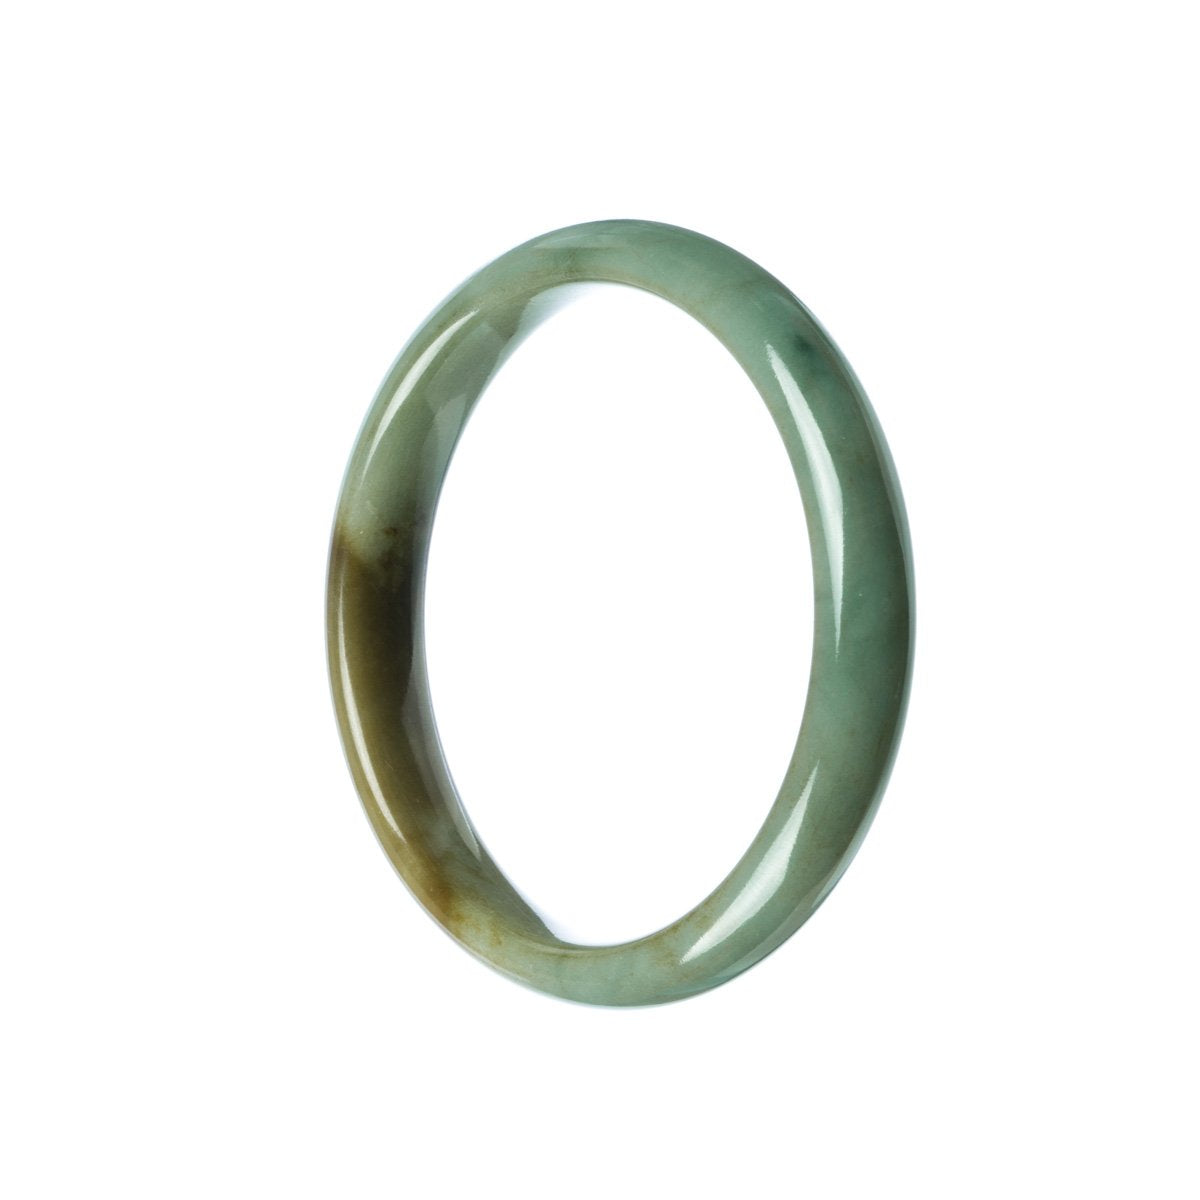 A half moon-shaped jadeite bracelet in genuine, untreated green and brown tones, measuring 58mm. Perfect for adding a touch of elegance and natural beauty to any outfit.